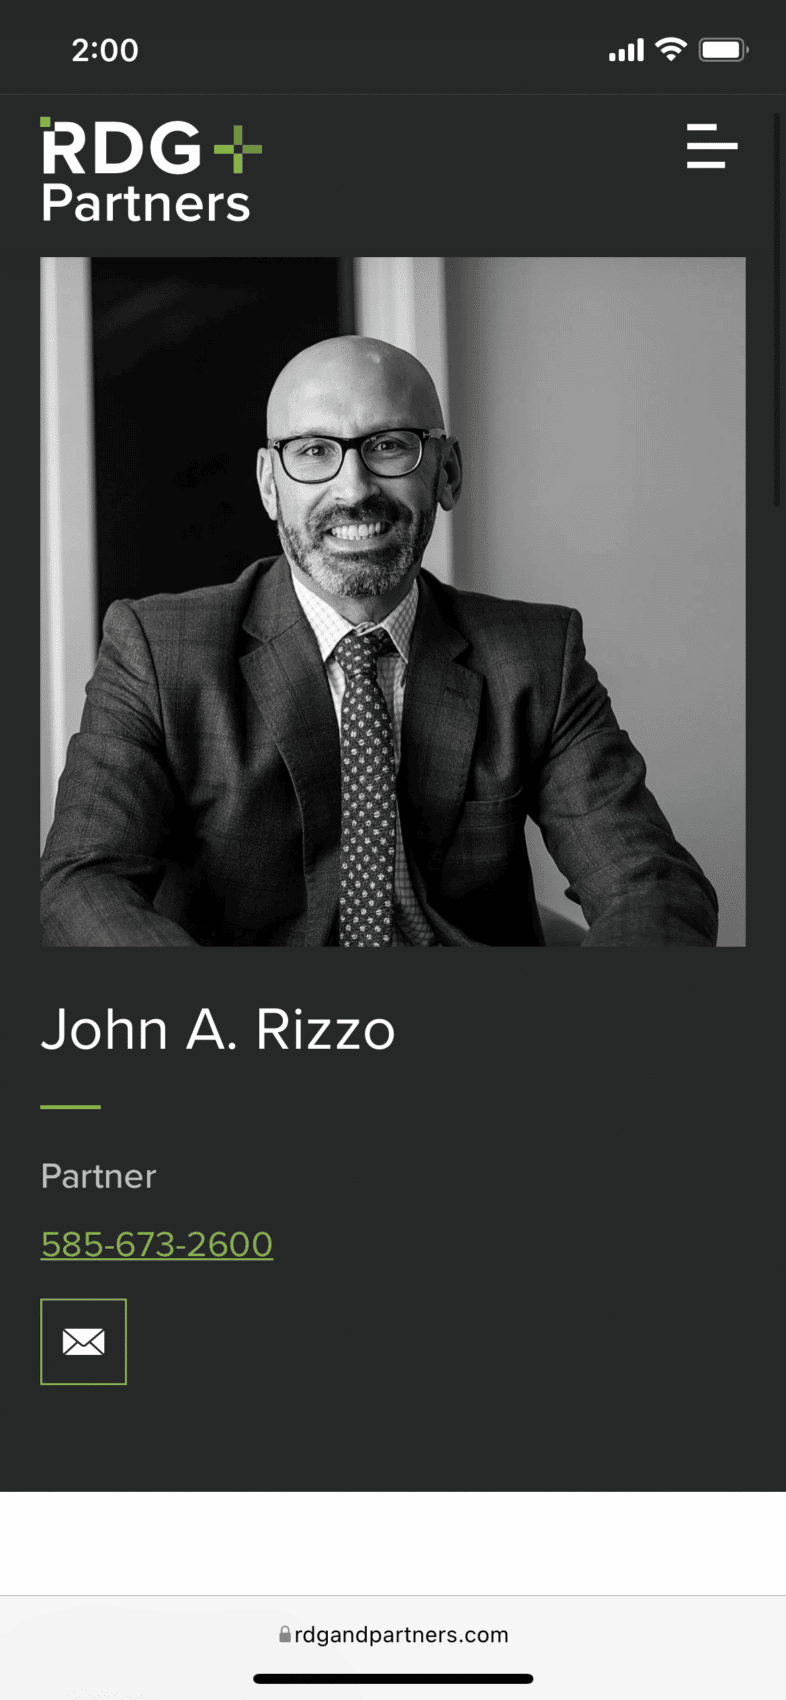 RDG+Partners responsive team and partners page for John Rizzo shown on a mobile mockup